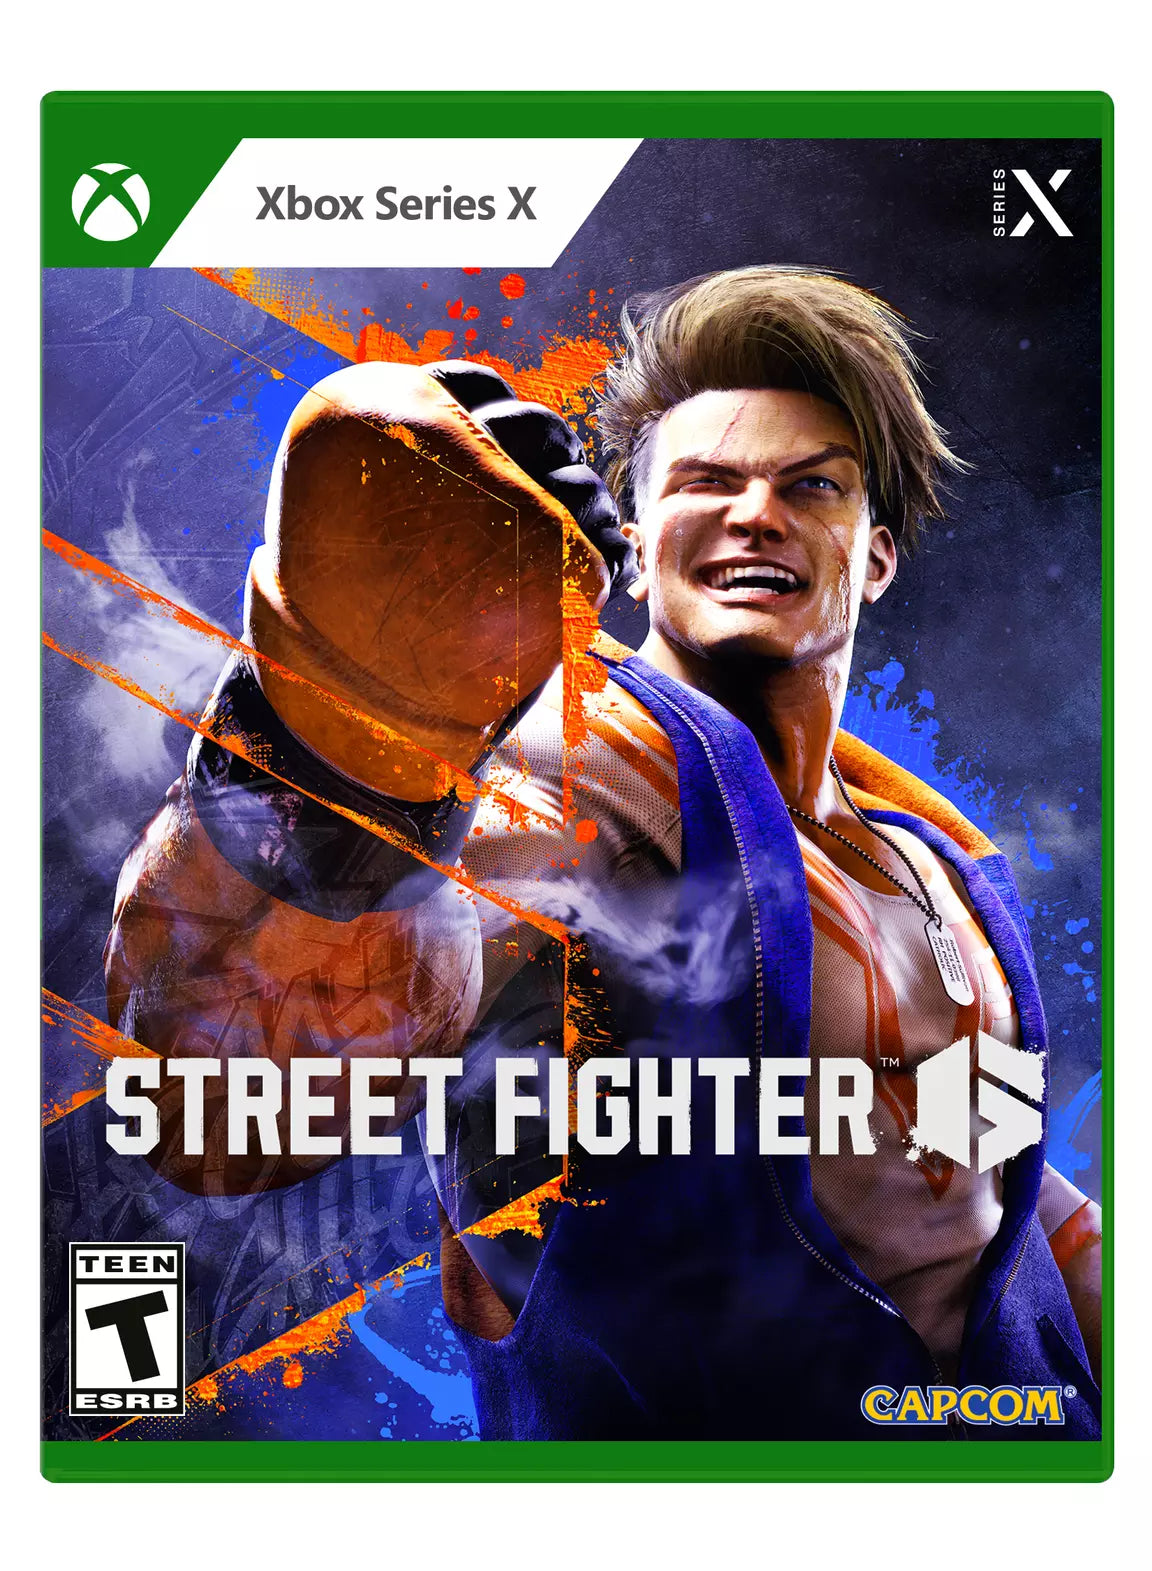 Street Fighter 6 is coming out on June two for PS5, Xbox X/S, PS4 and PC. - Street  Fighter™ 6 - TapTap